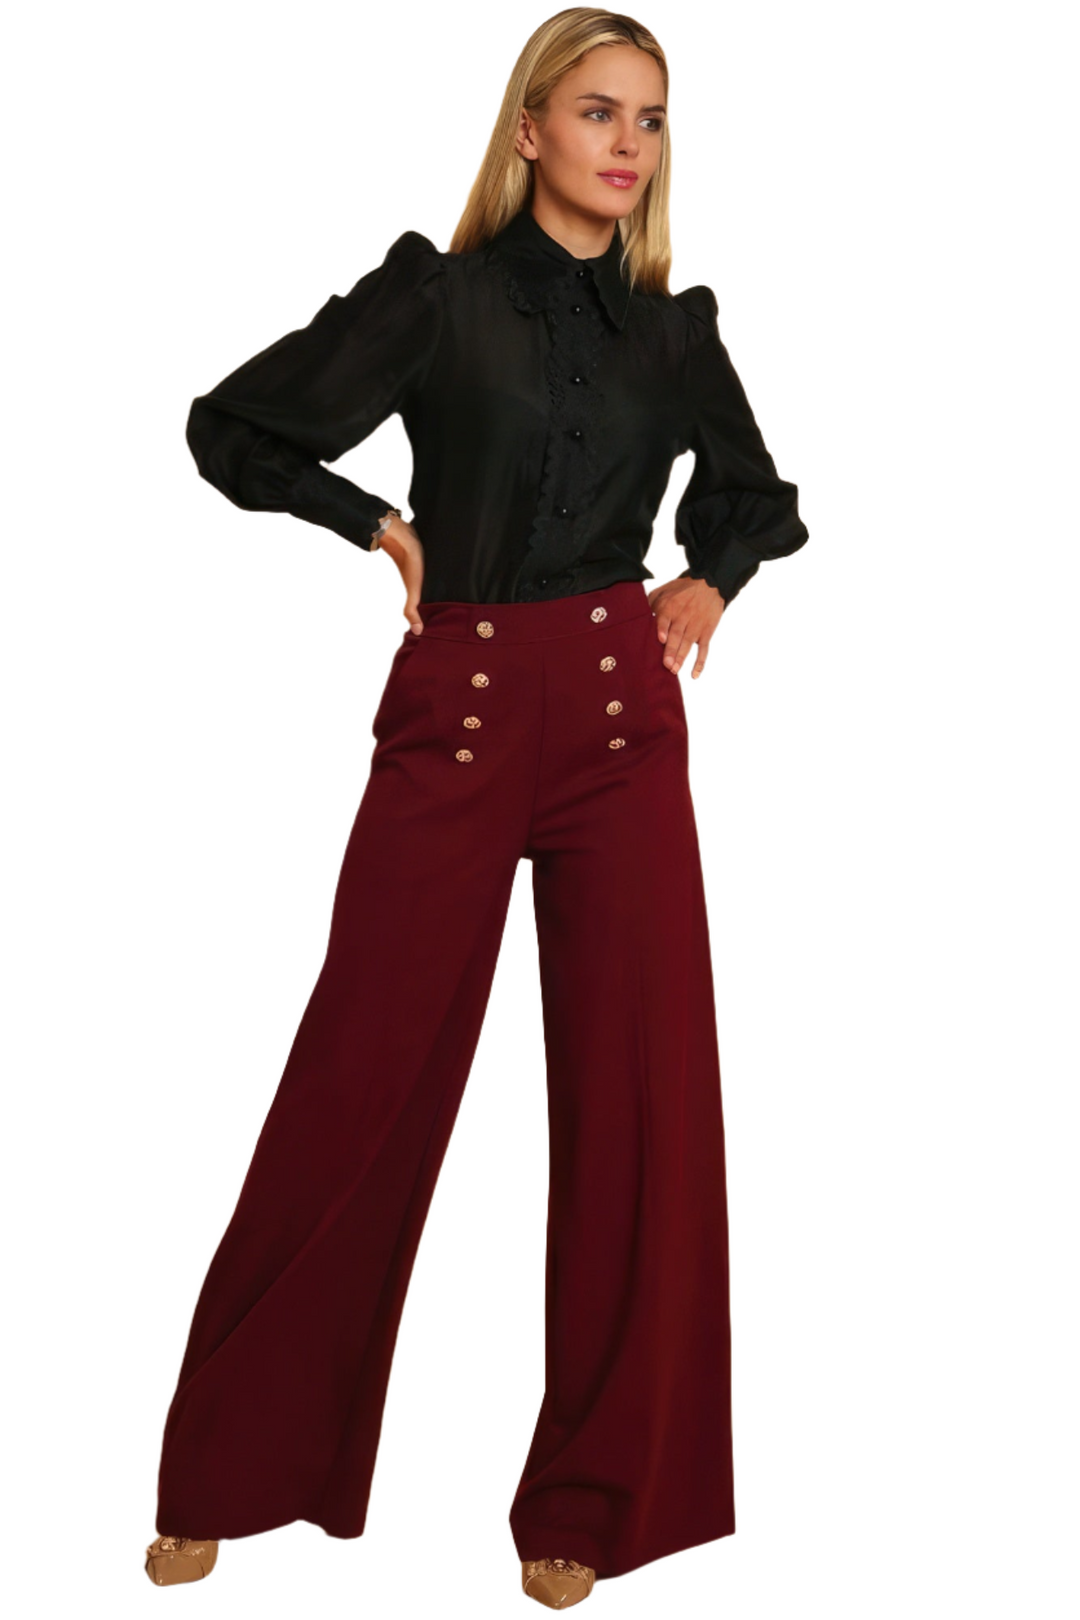 High Waist Dressy Pants in Pomegranate with Wide-Leg Silhouette